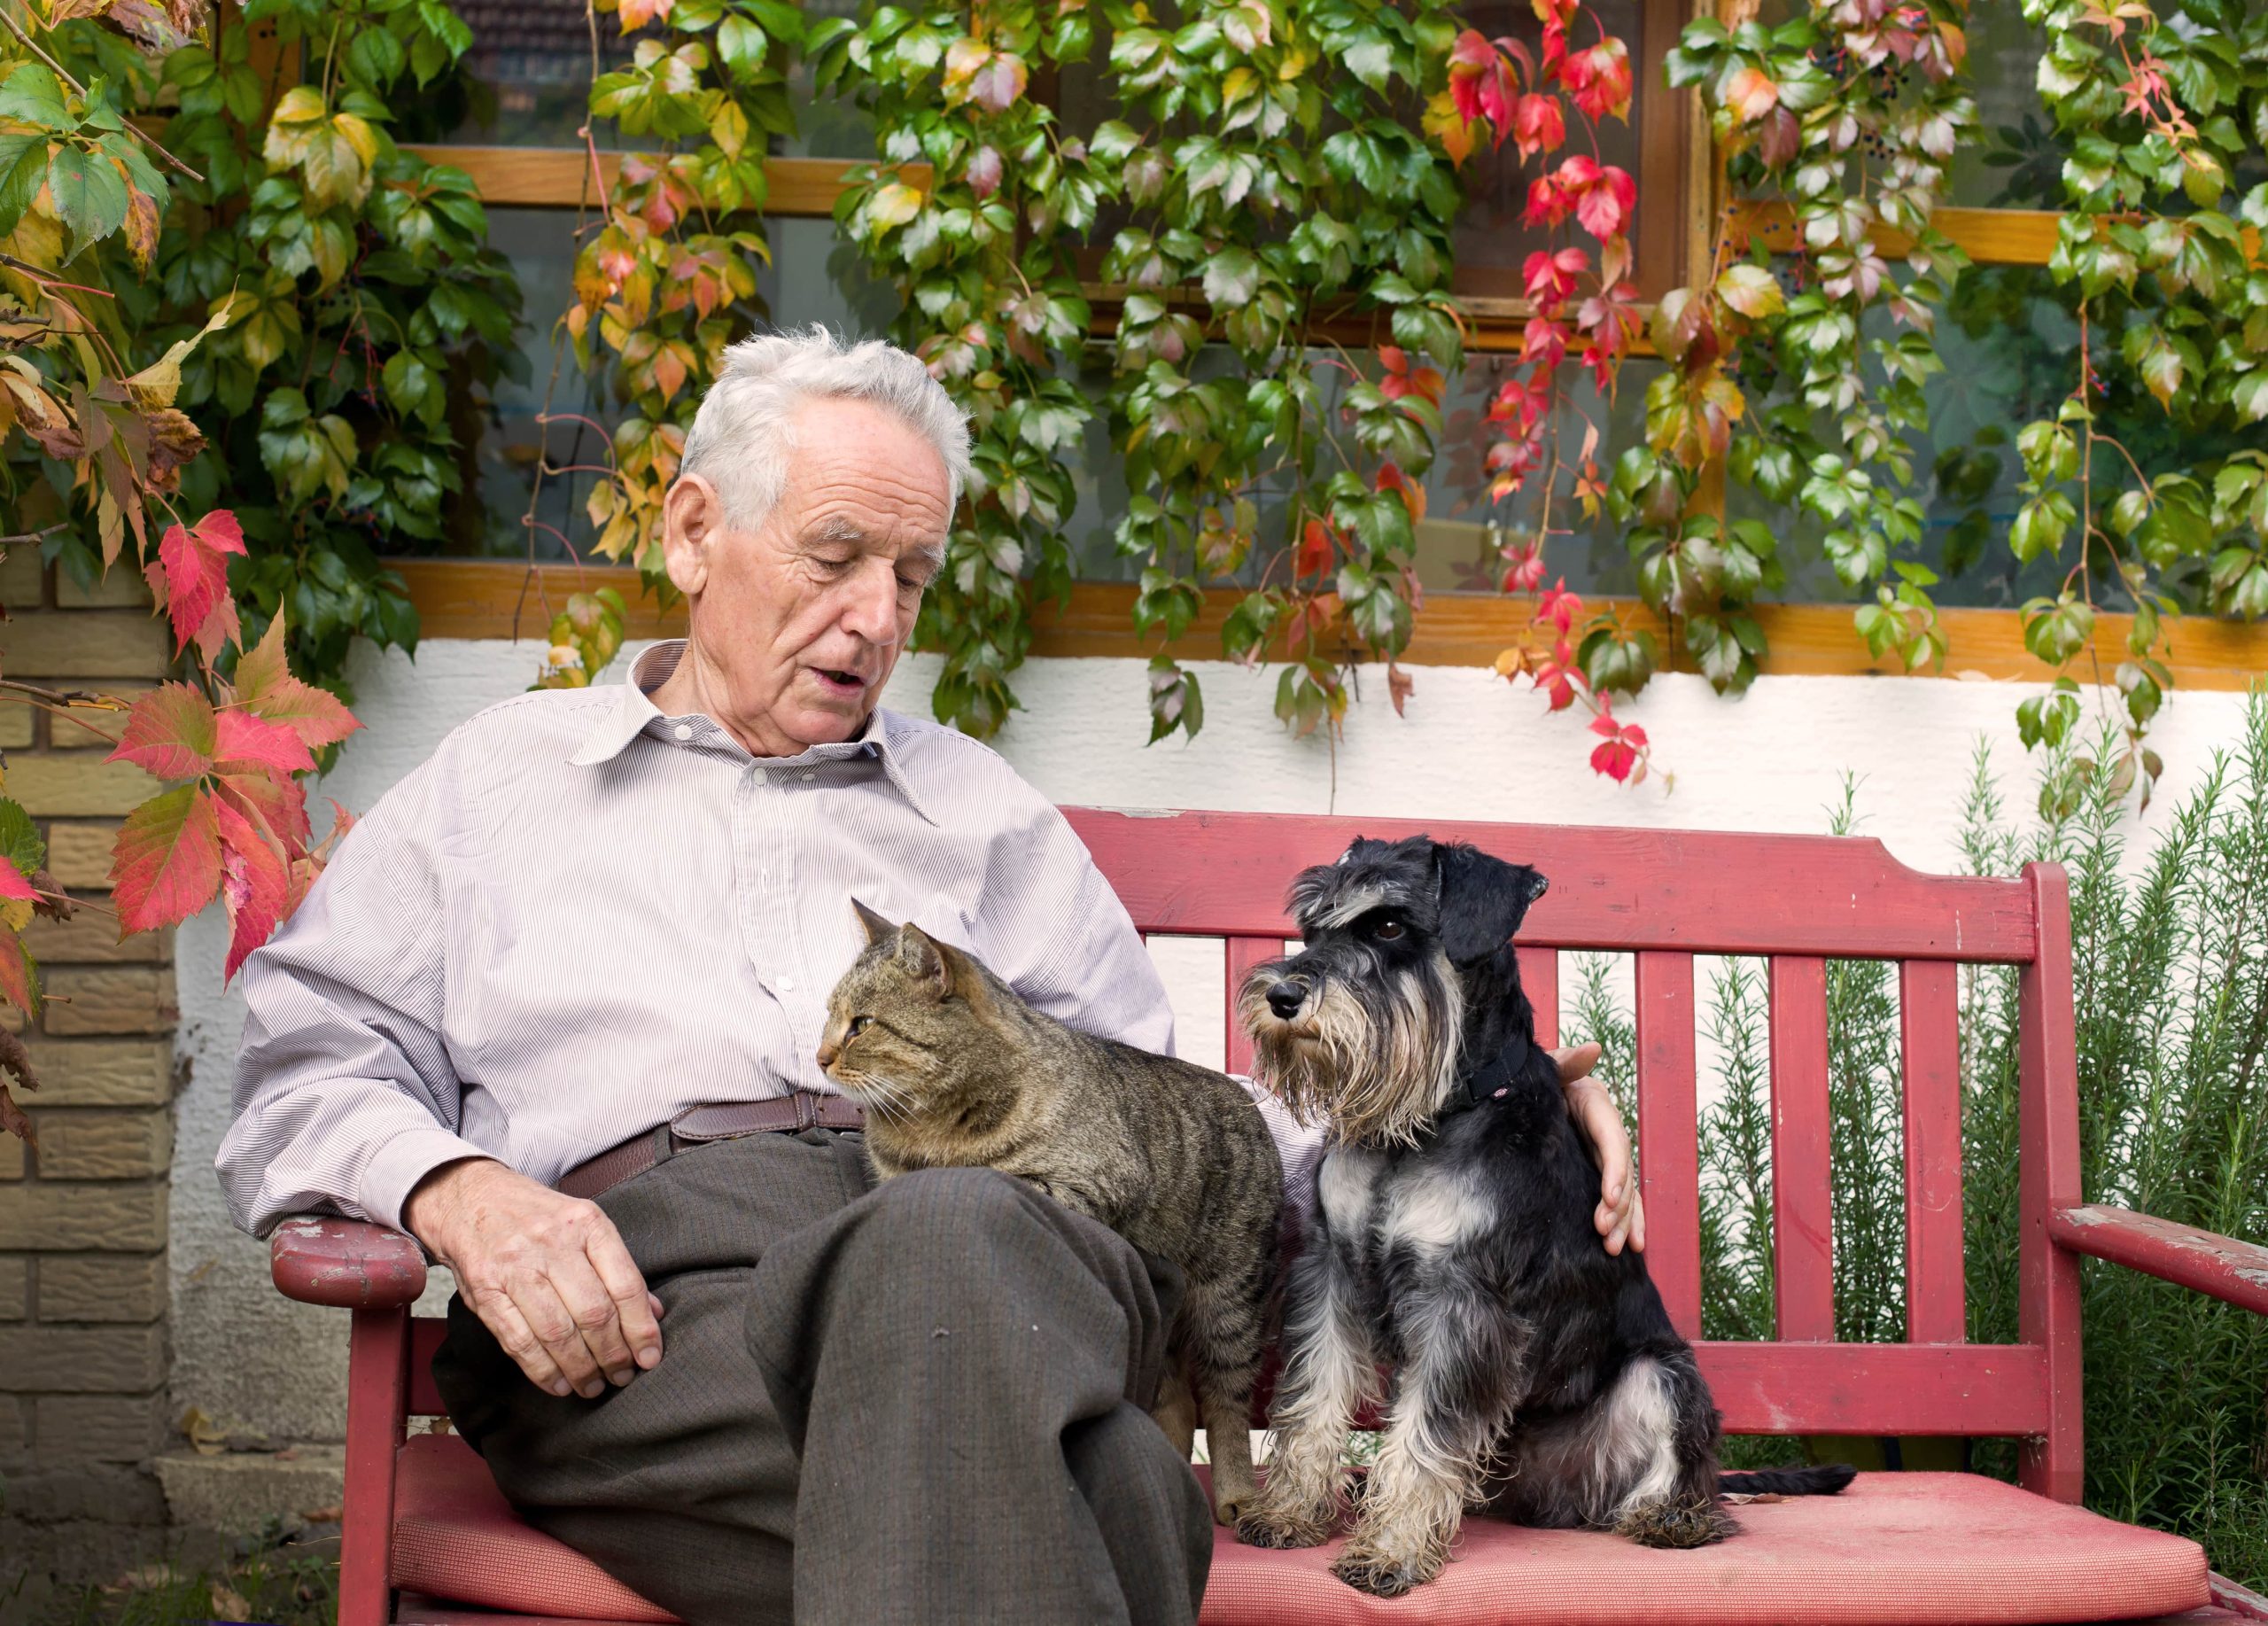 senior citizen sitting on bench with cat and dog